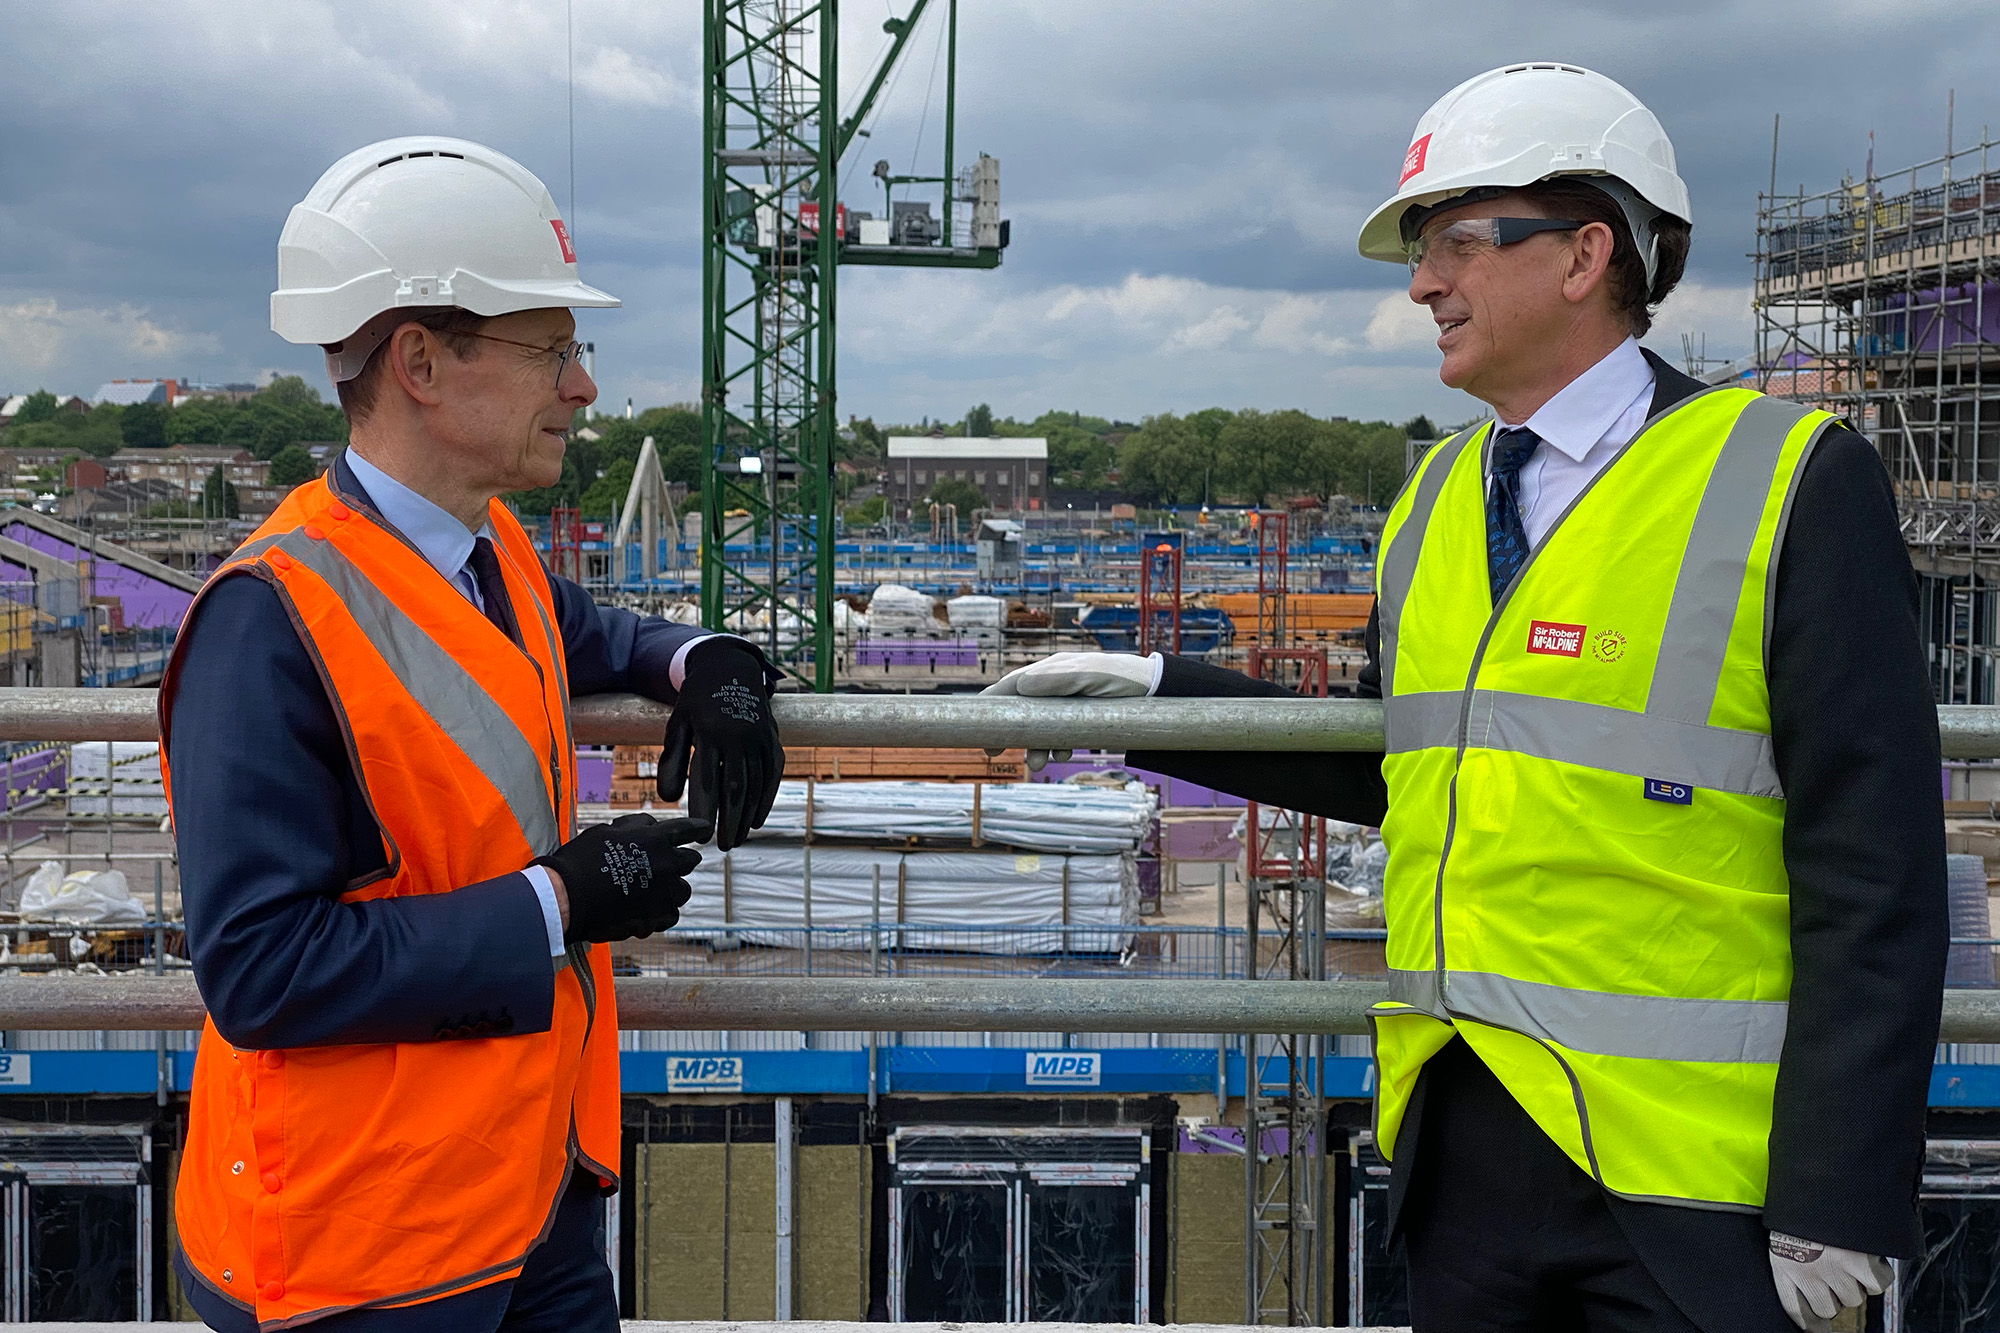 Andy Street, Mayor of the West Midlands (left) and Legal & General CEO Sir Nigel Wilson announced a partnership agreement earlier this year which saw the financial services provider committing to invest £4bn in regeneration, housing and levelling up across the West Midlands.